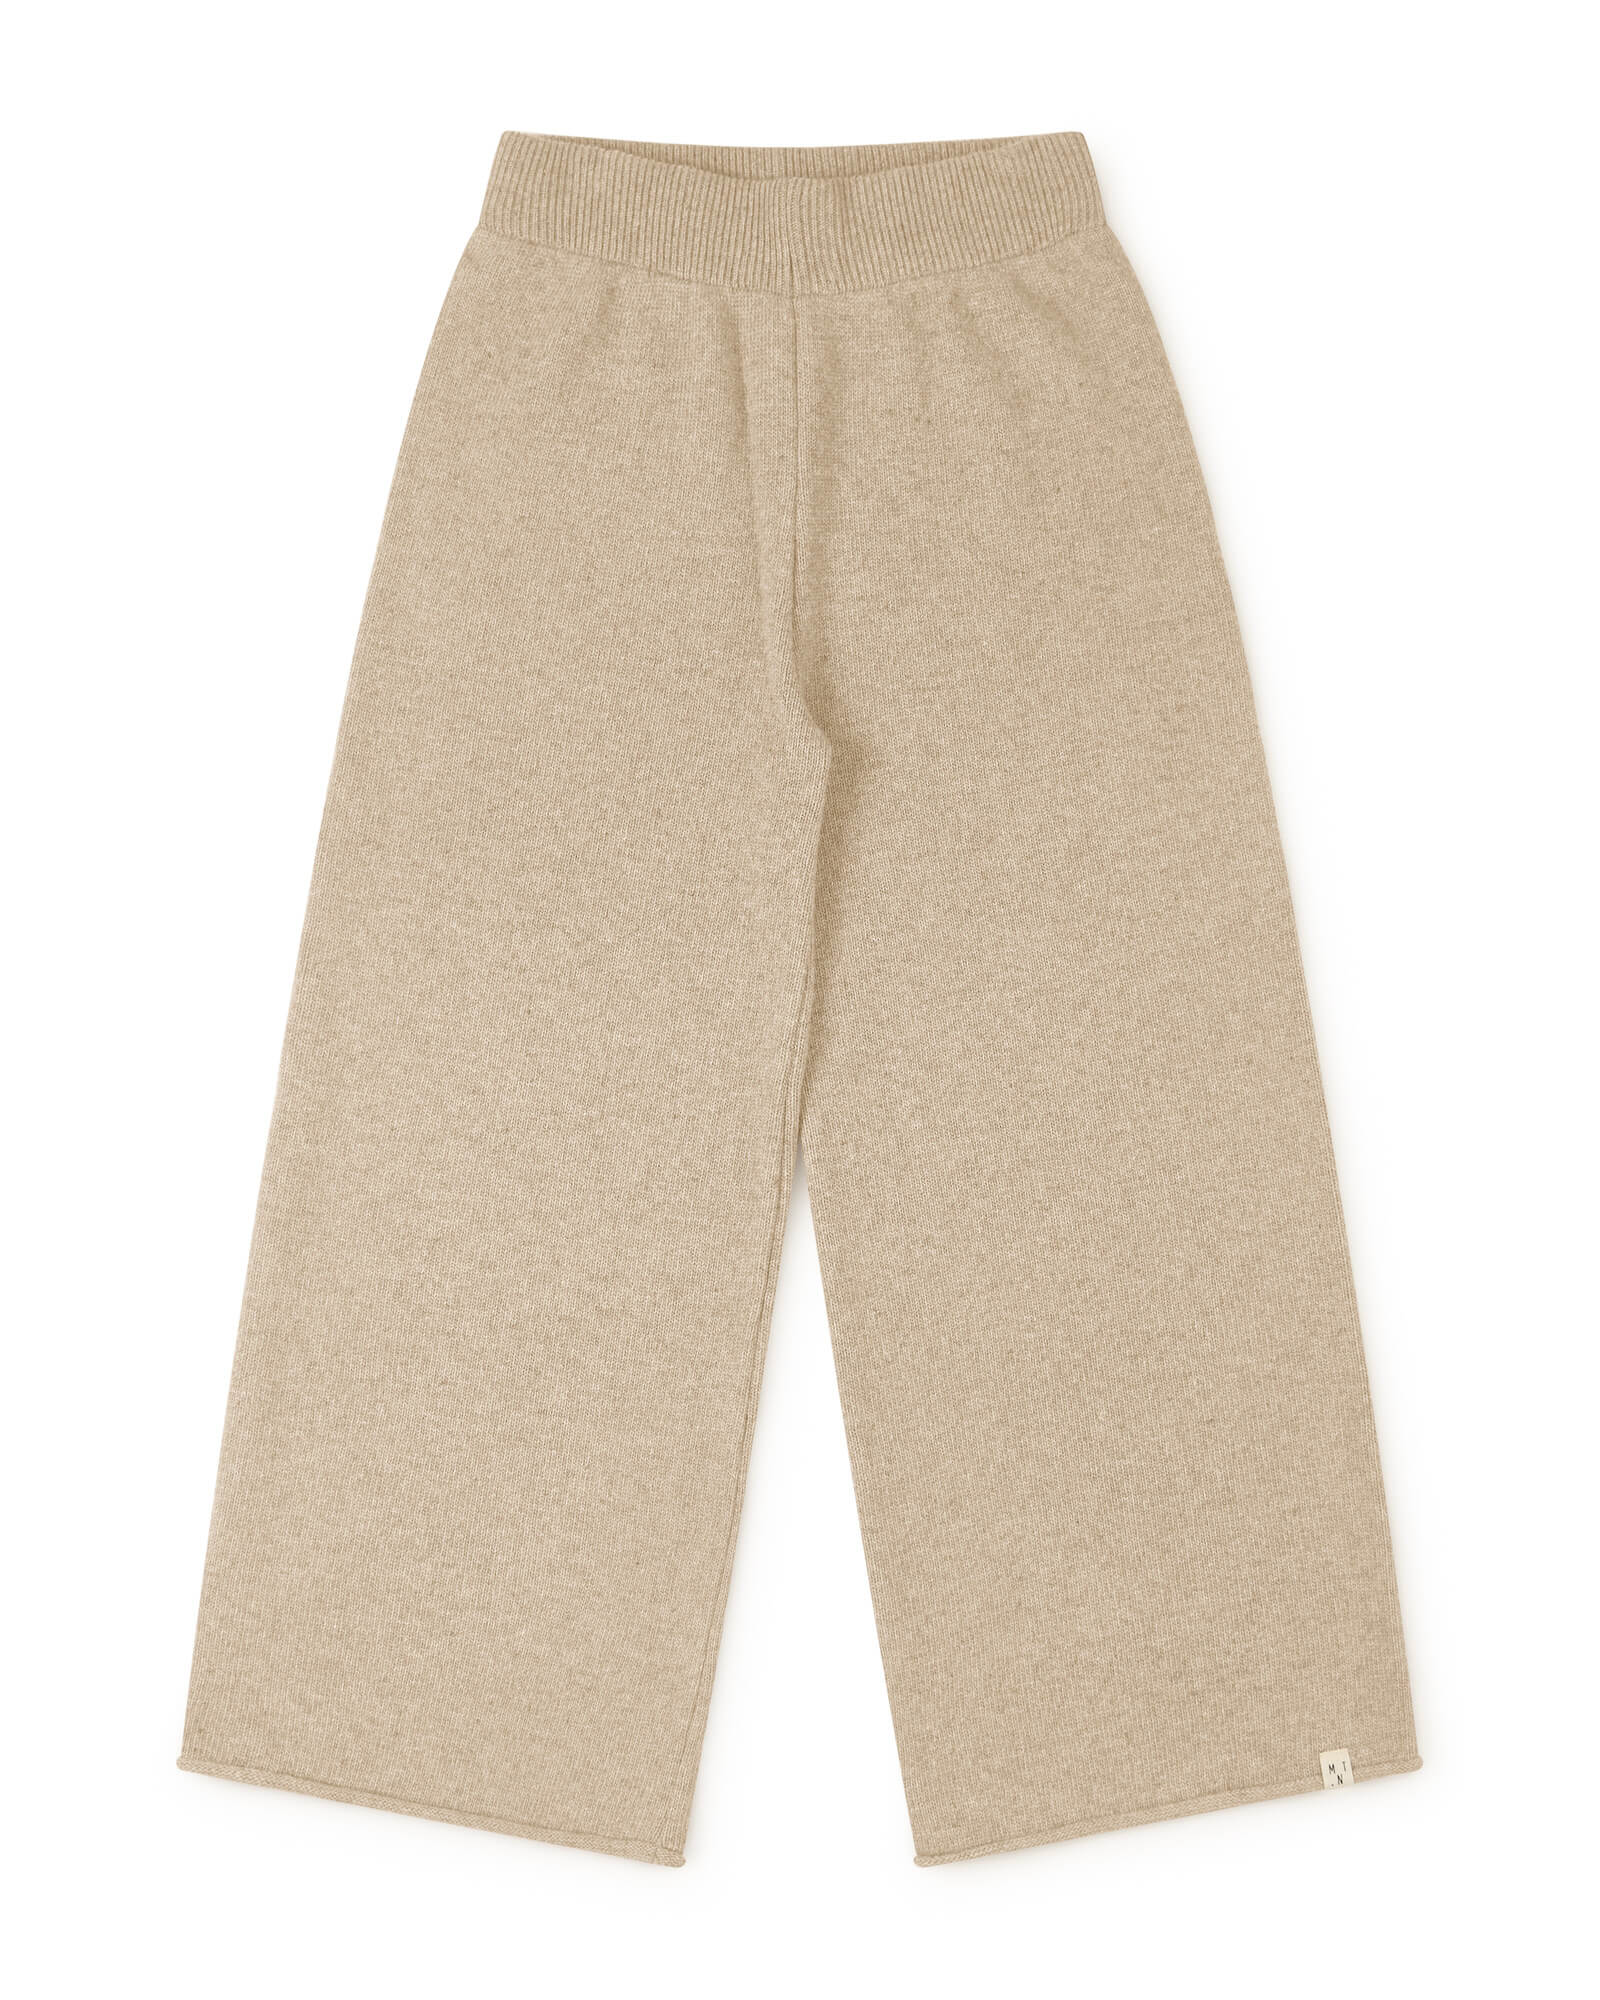 Light brown, straight trousers limestone made from recycled wool by Matona